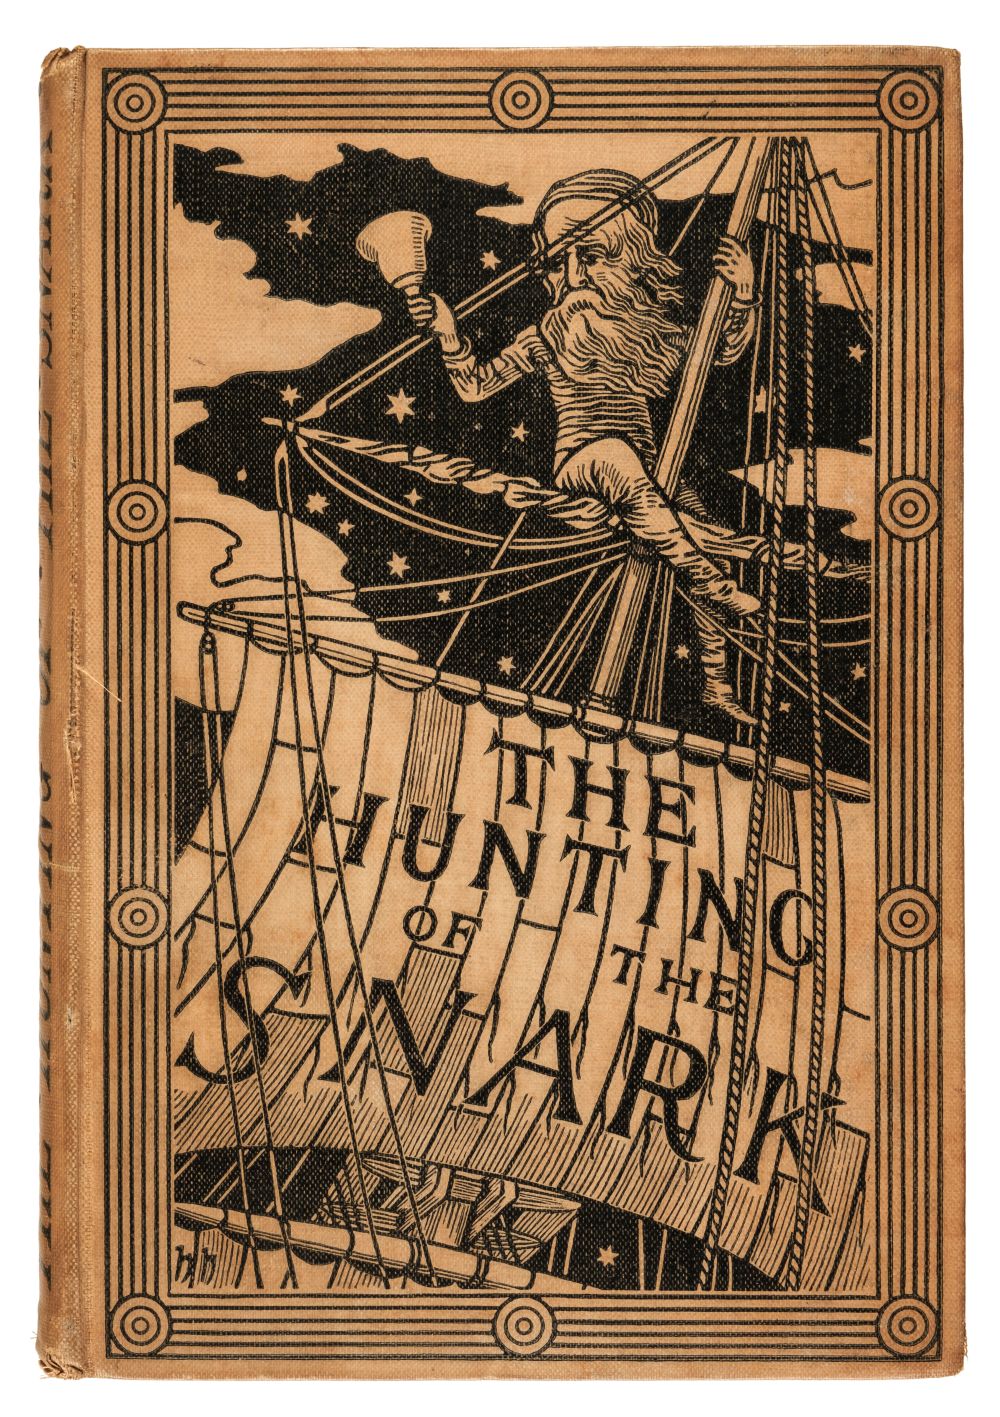 Dodgson (Charles Lutwidge, "Lewis Carroll"). The Hunting of the Snark, 1st edition, 1876